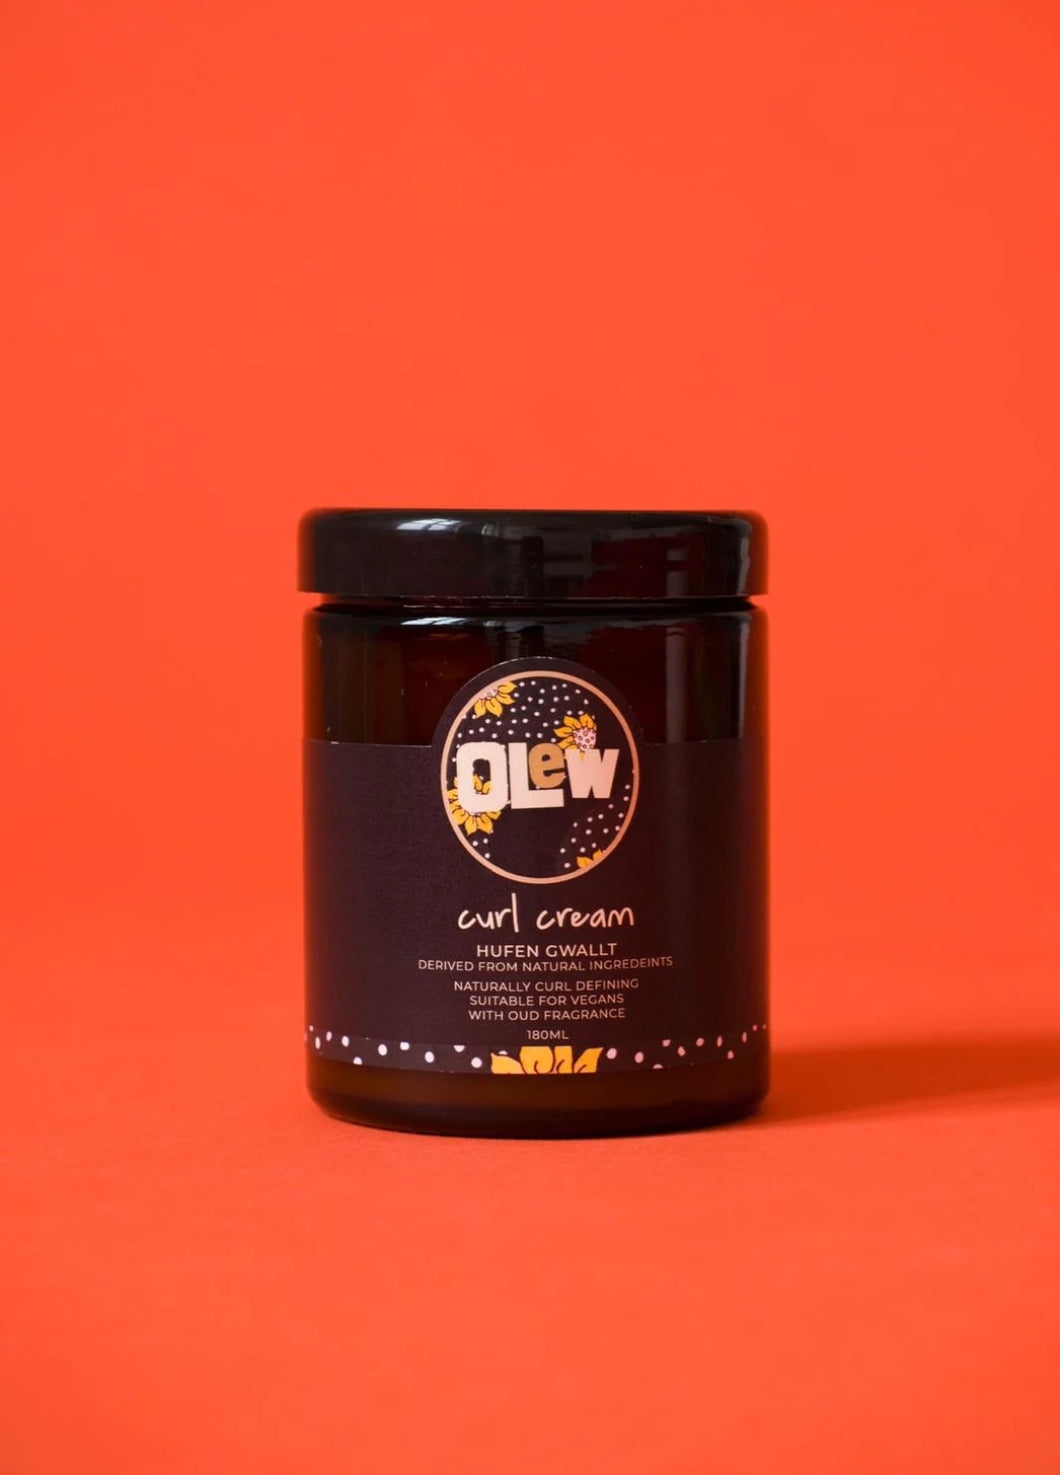 Olew Curl Cream with Oud fragrance